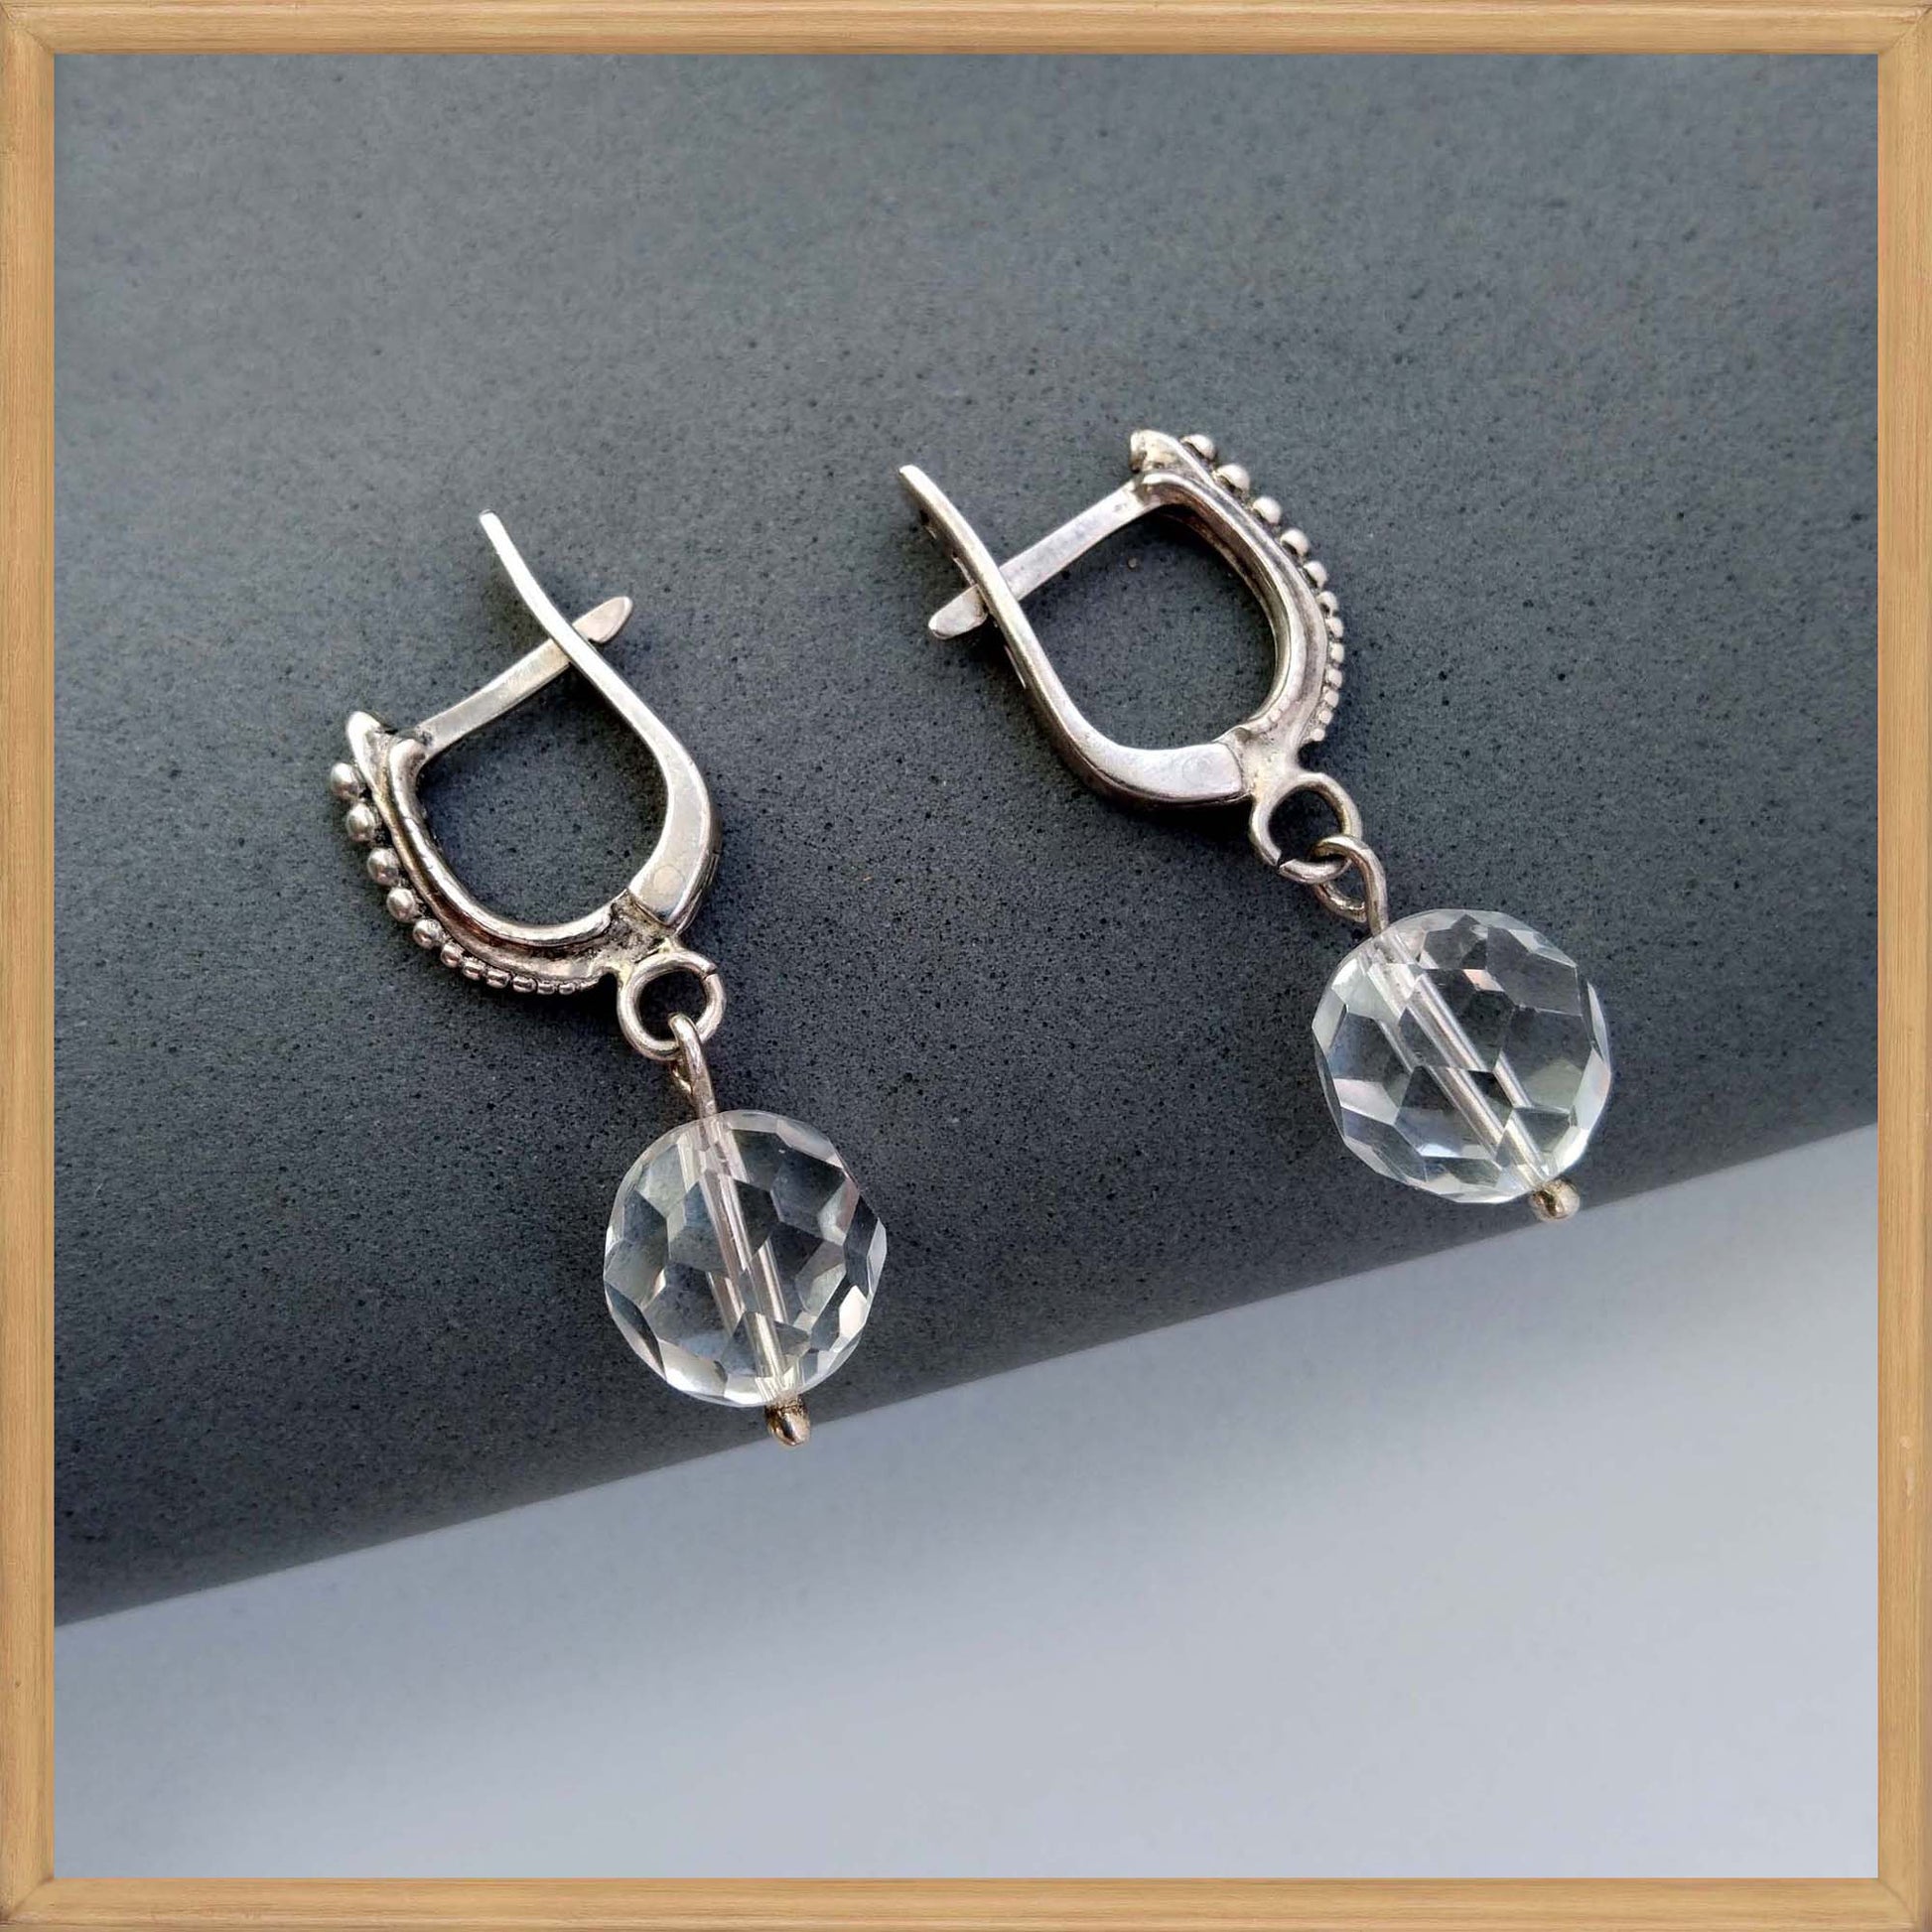 Faceted Quartz Ball Earrings in Sterling Silver